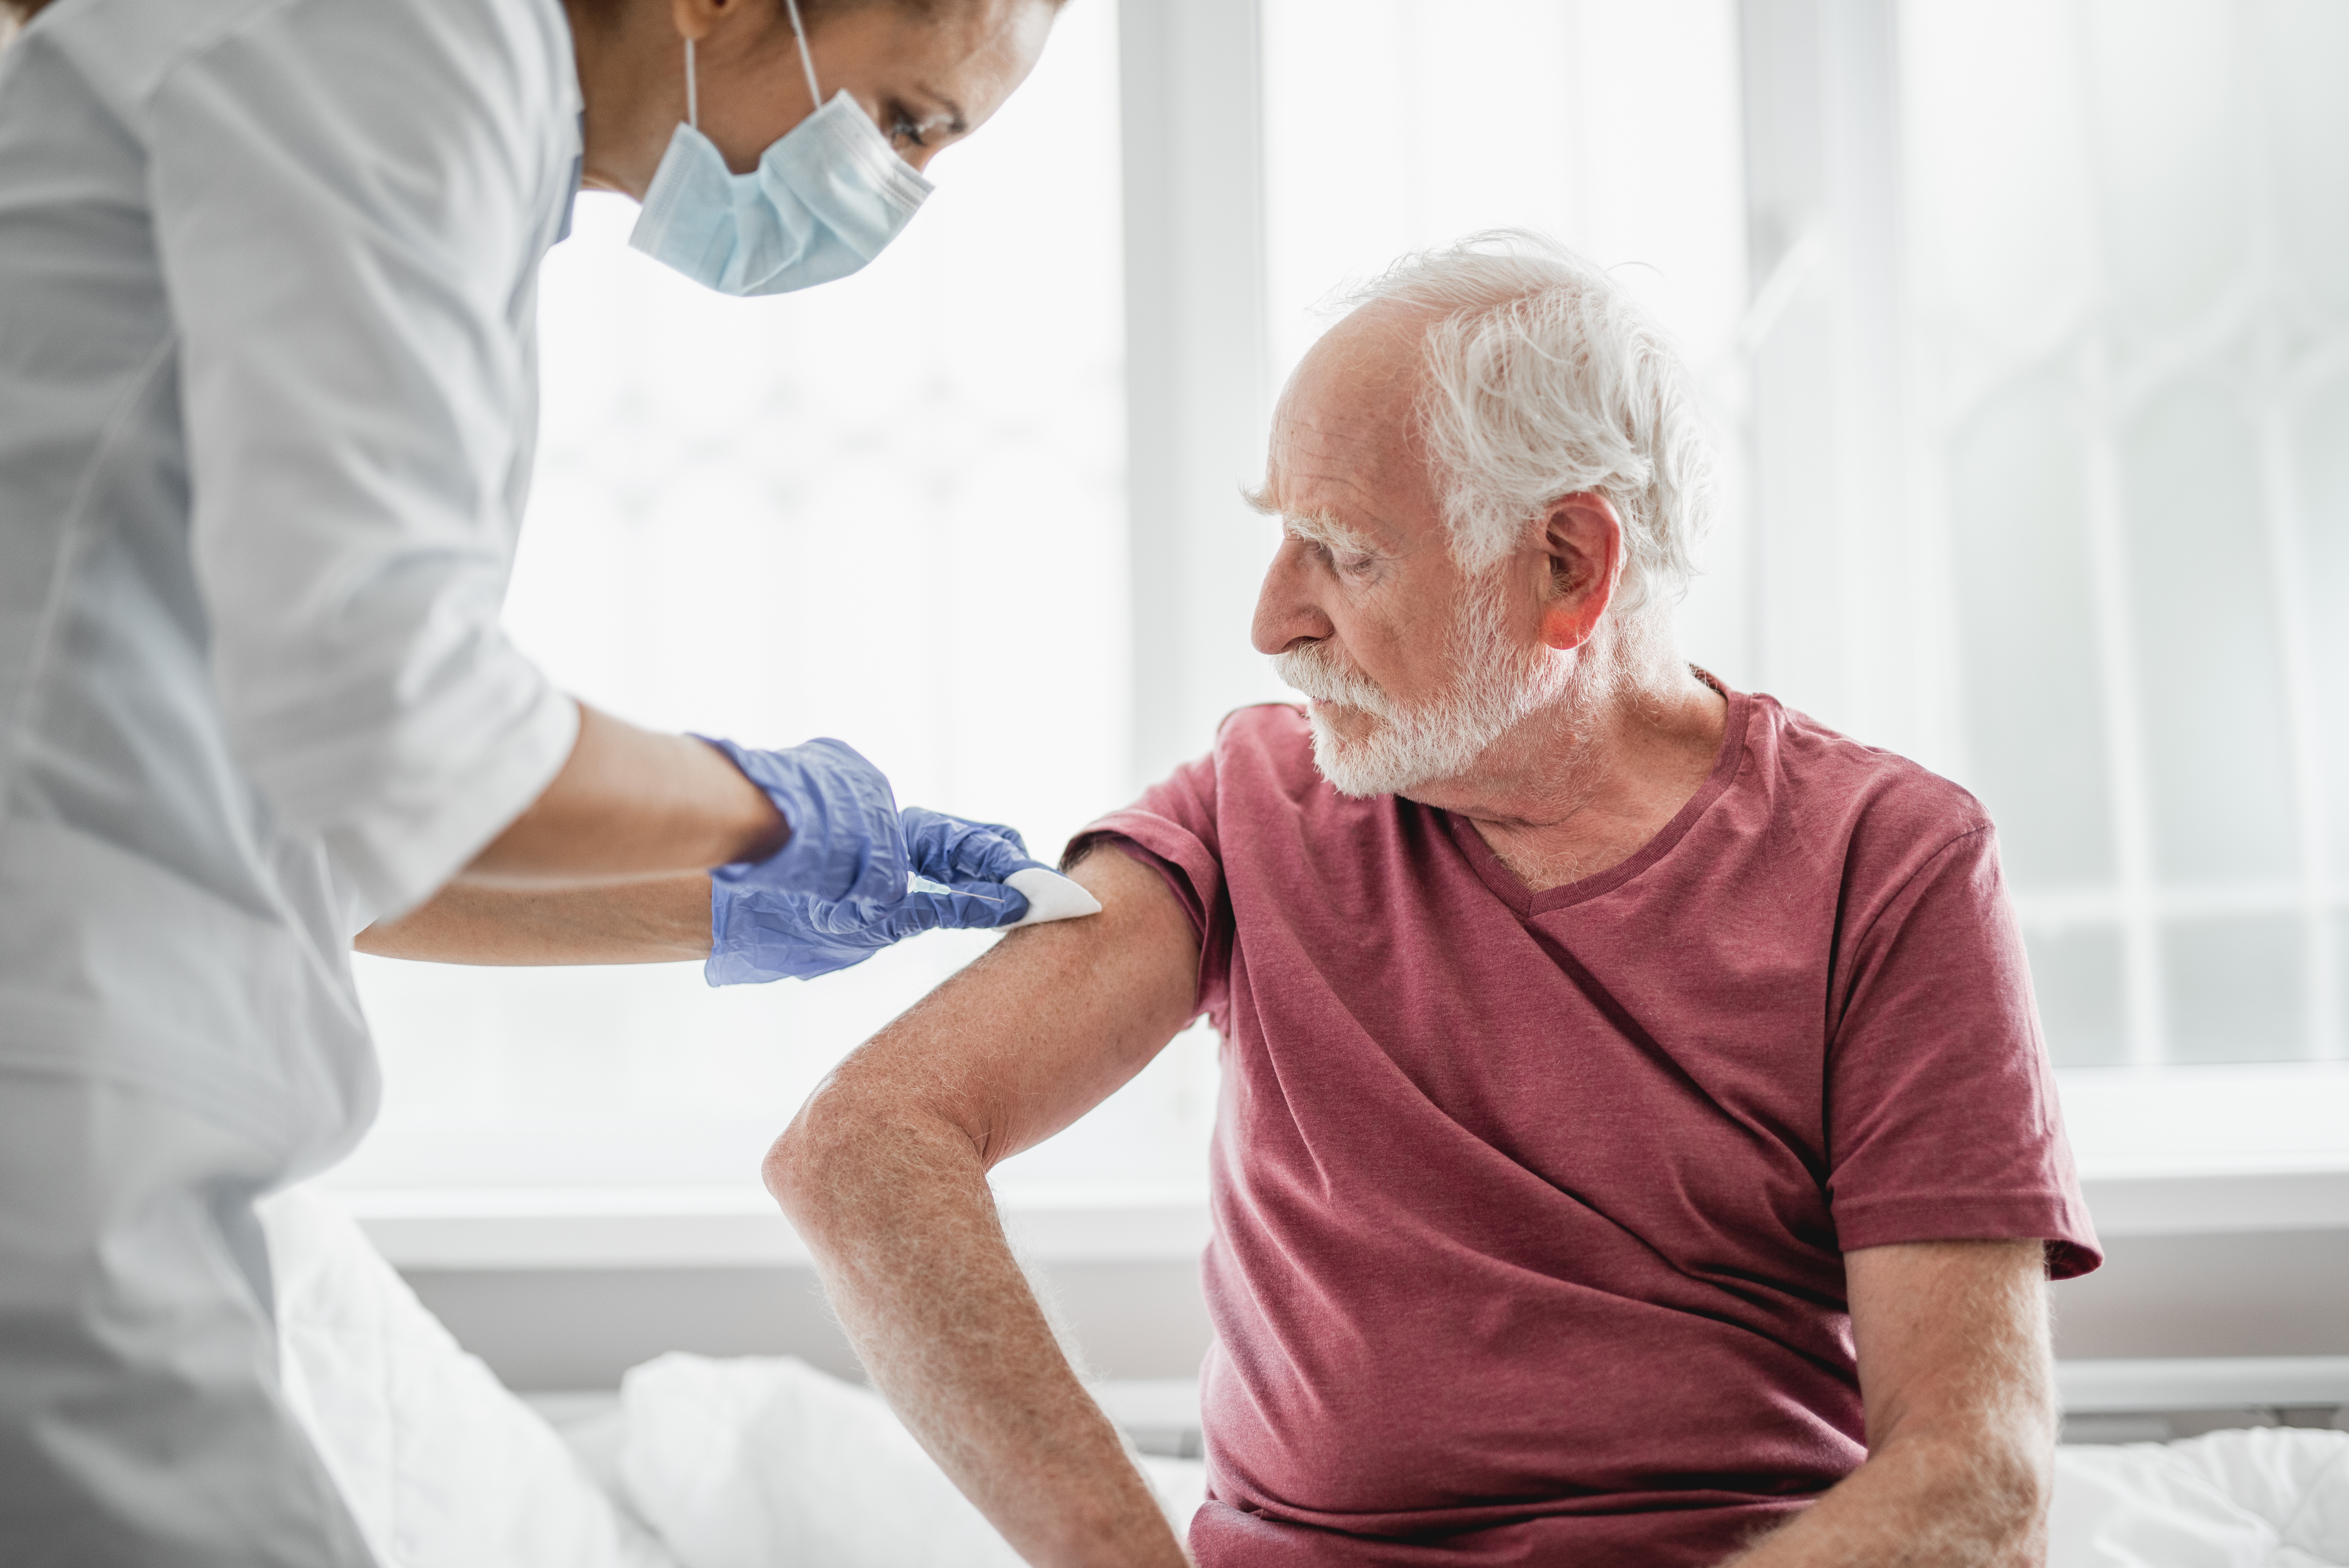 Image of older man in a red shirt sitting down watching a medical professional administer a vaccine.